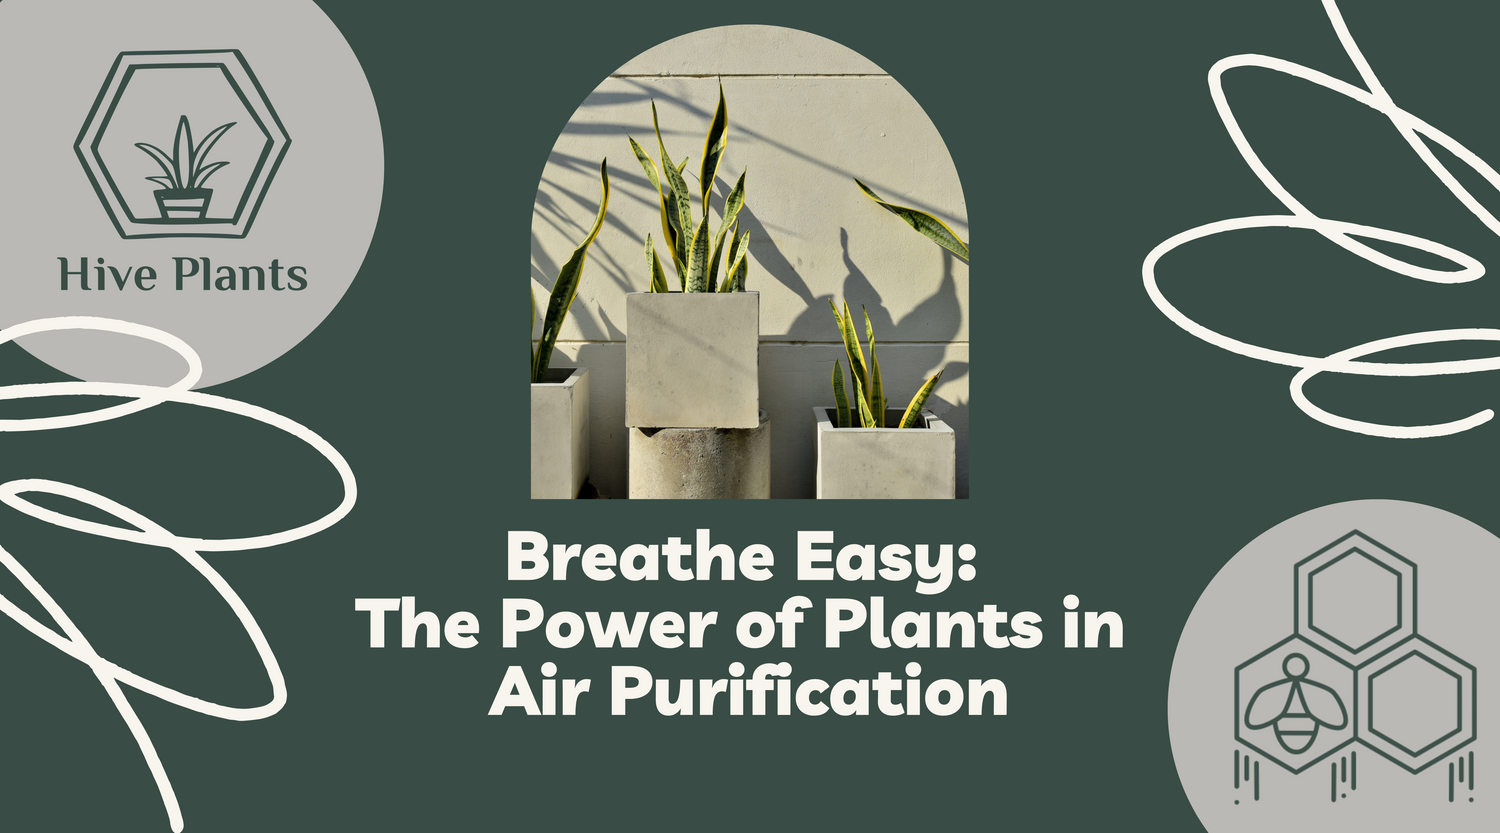 Breathe Easy: The Power of Plants in Air Purification